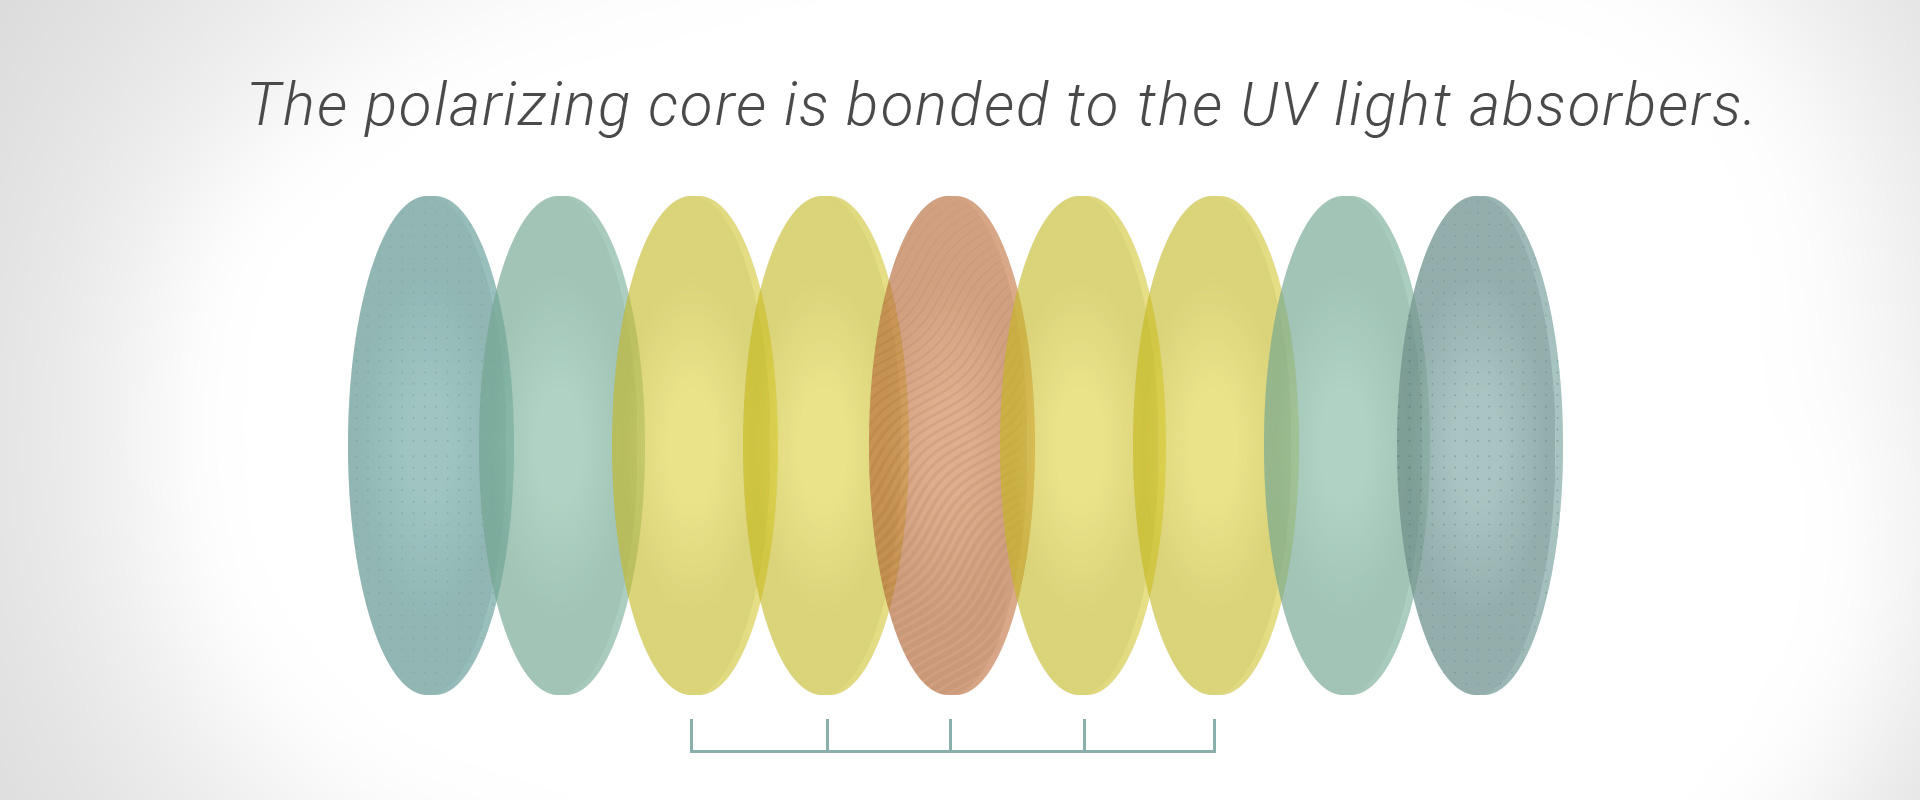 The polarizing core is bonded to the UV light absorbers